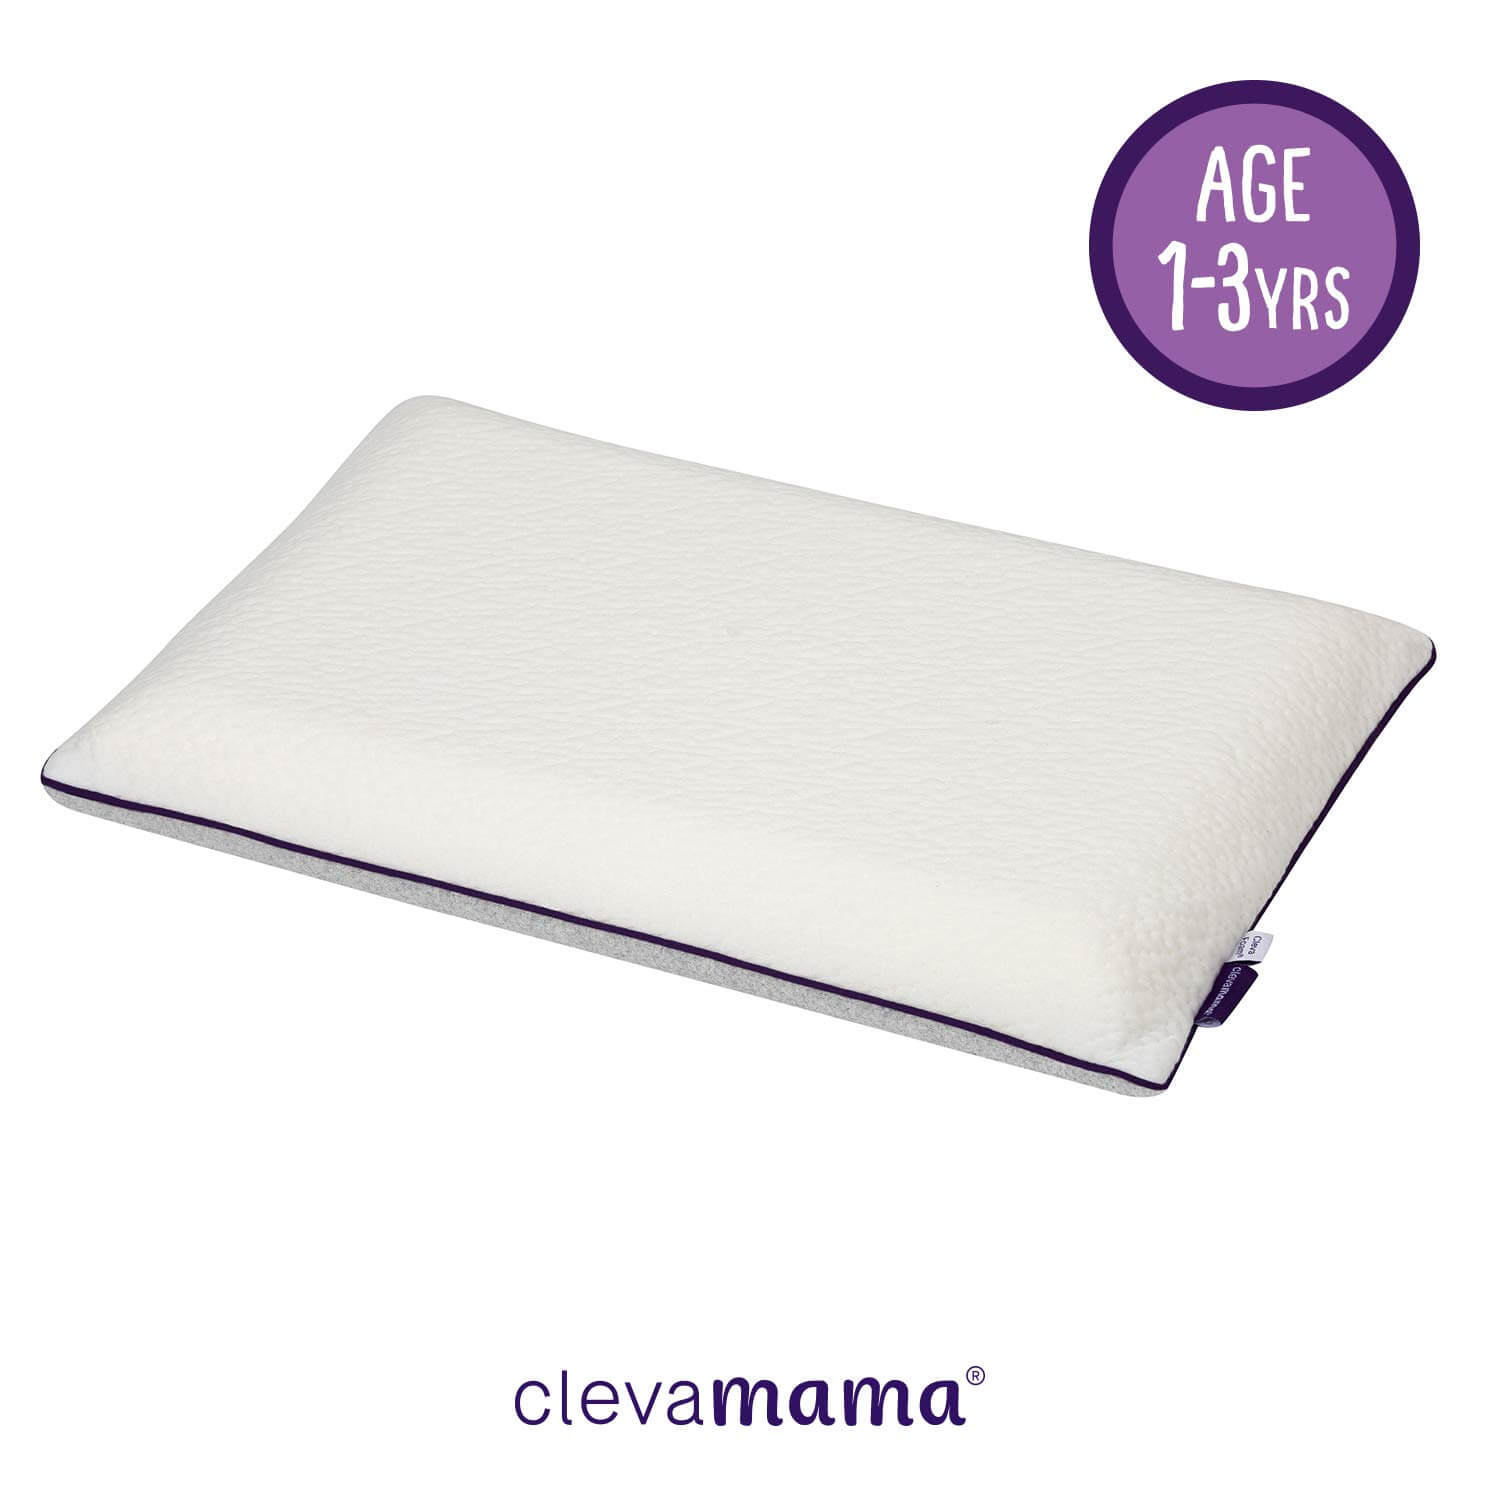 ClevaMama ClevaFoam Toddler Pillow - Breathable Kids Pillow to Prevent Flat Head Syndrome +12 Months